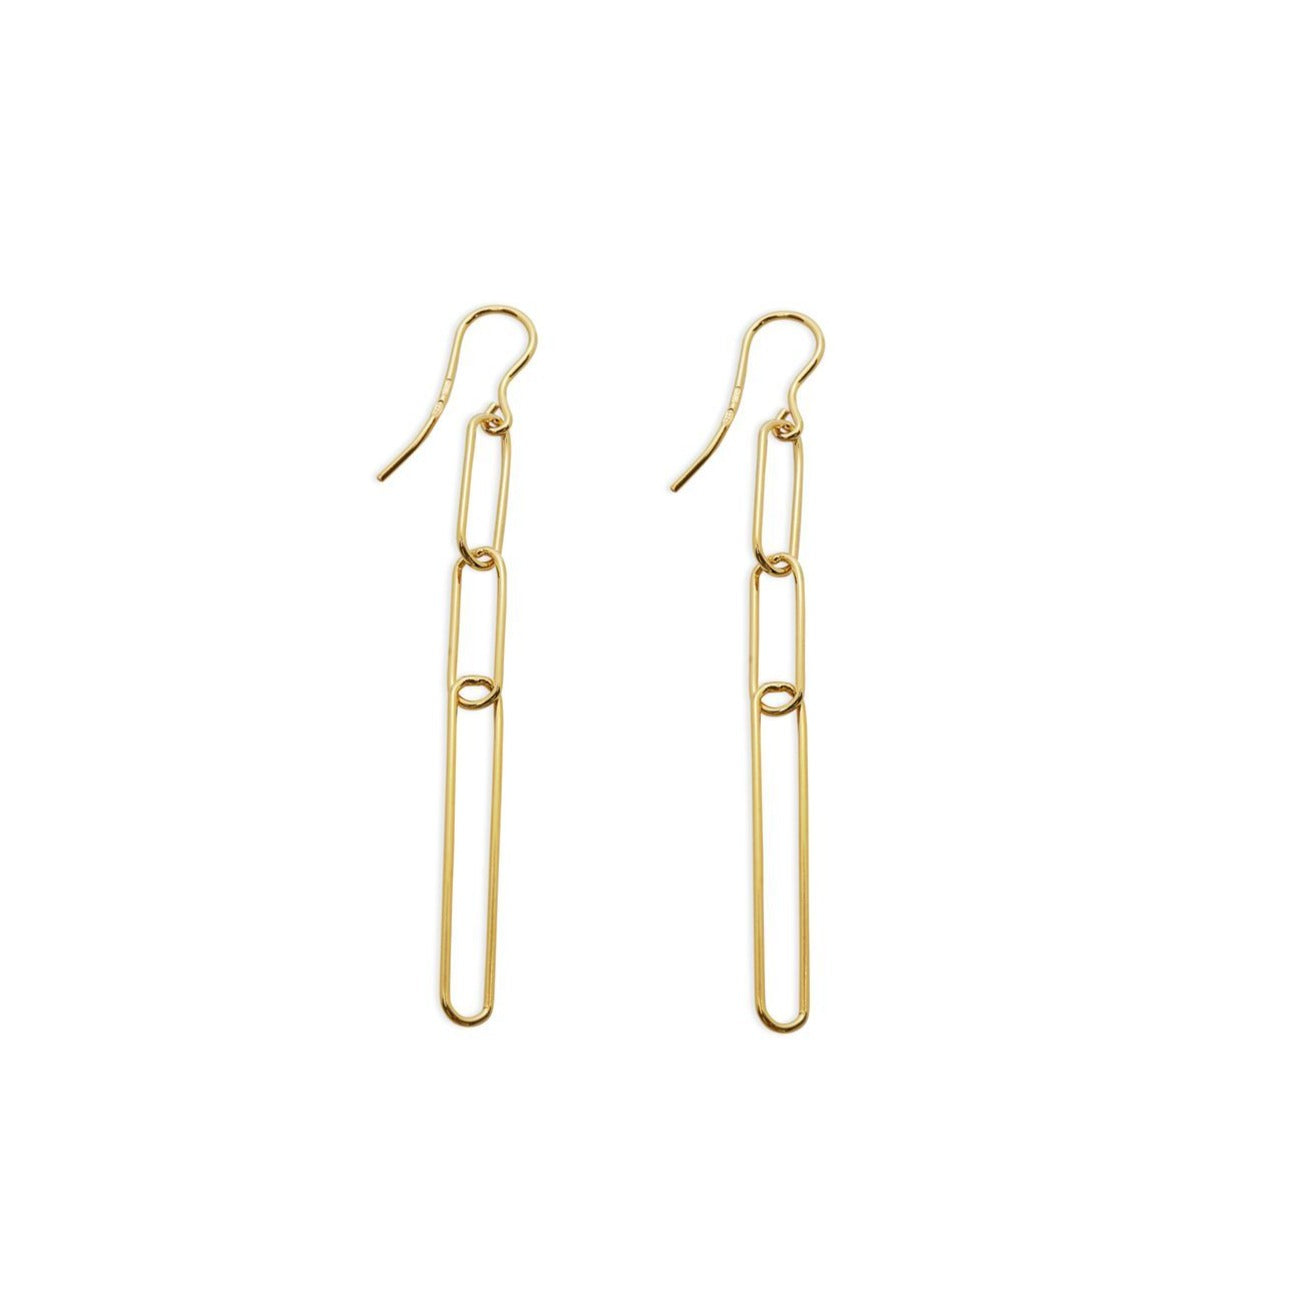 THE EVIE LINK EARRING